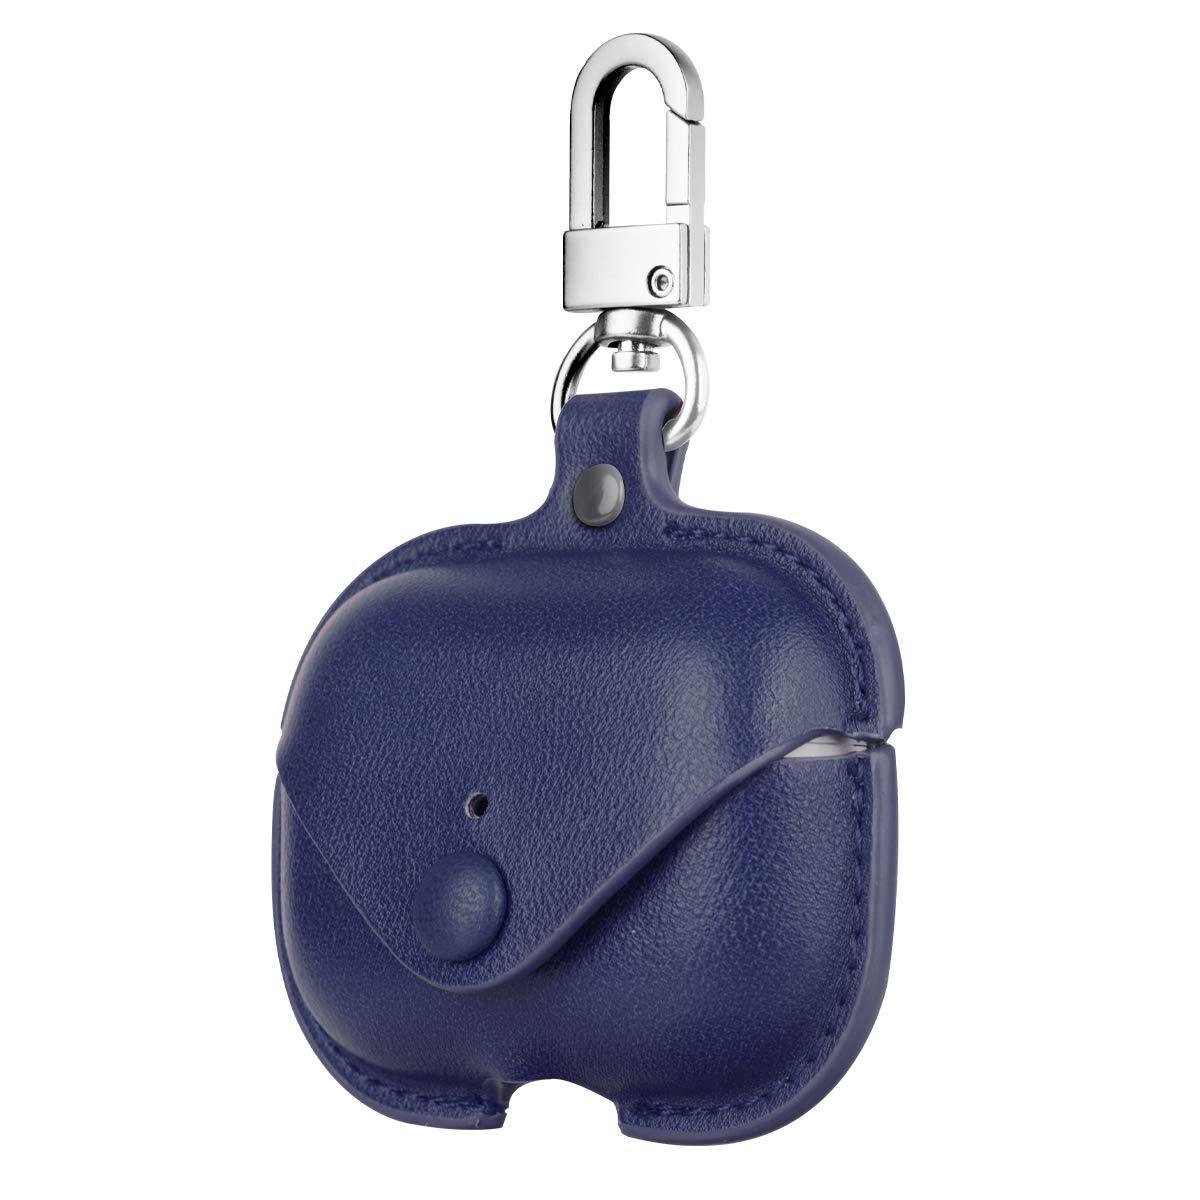 LiKGUS Soft Case for Airpods Pro Accessories Key Luxury Leather Storage Bag Earphone Cover with Keychain Charging Case (Airpod Not Included) (BLUE)